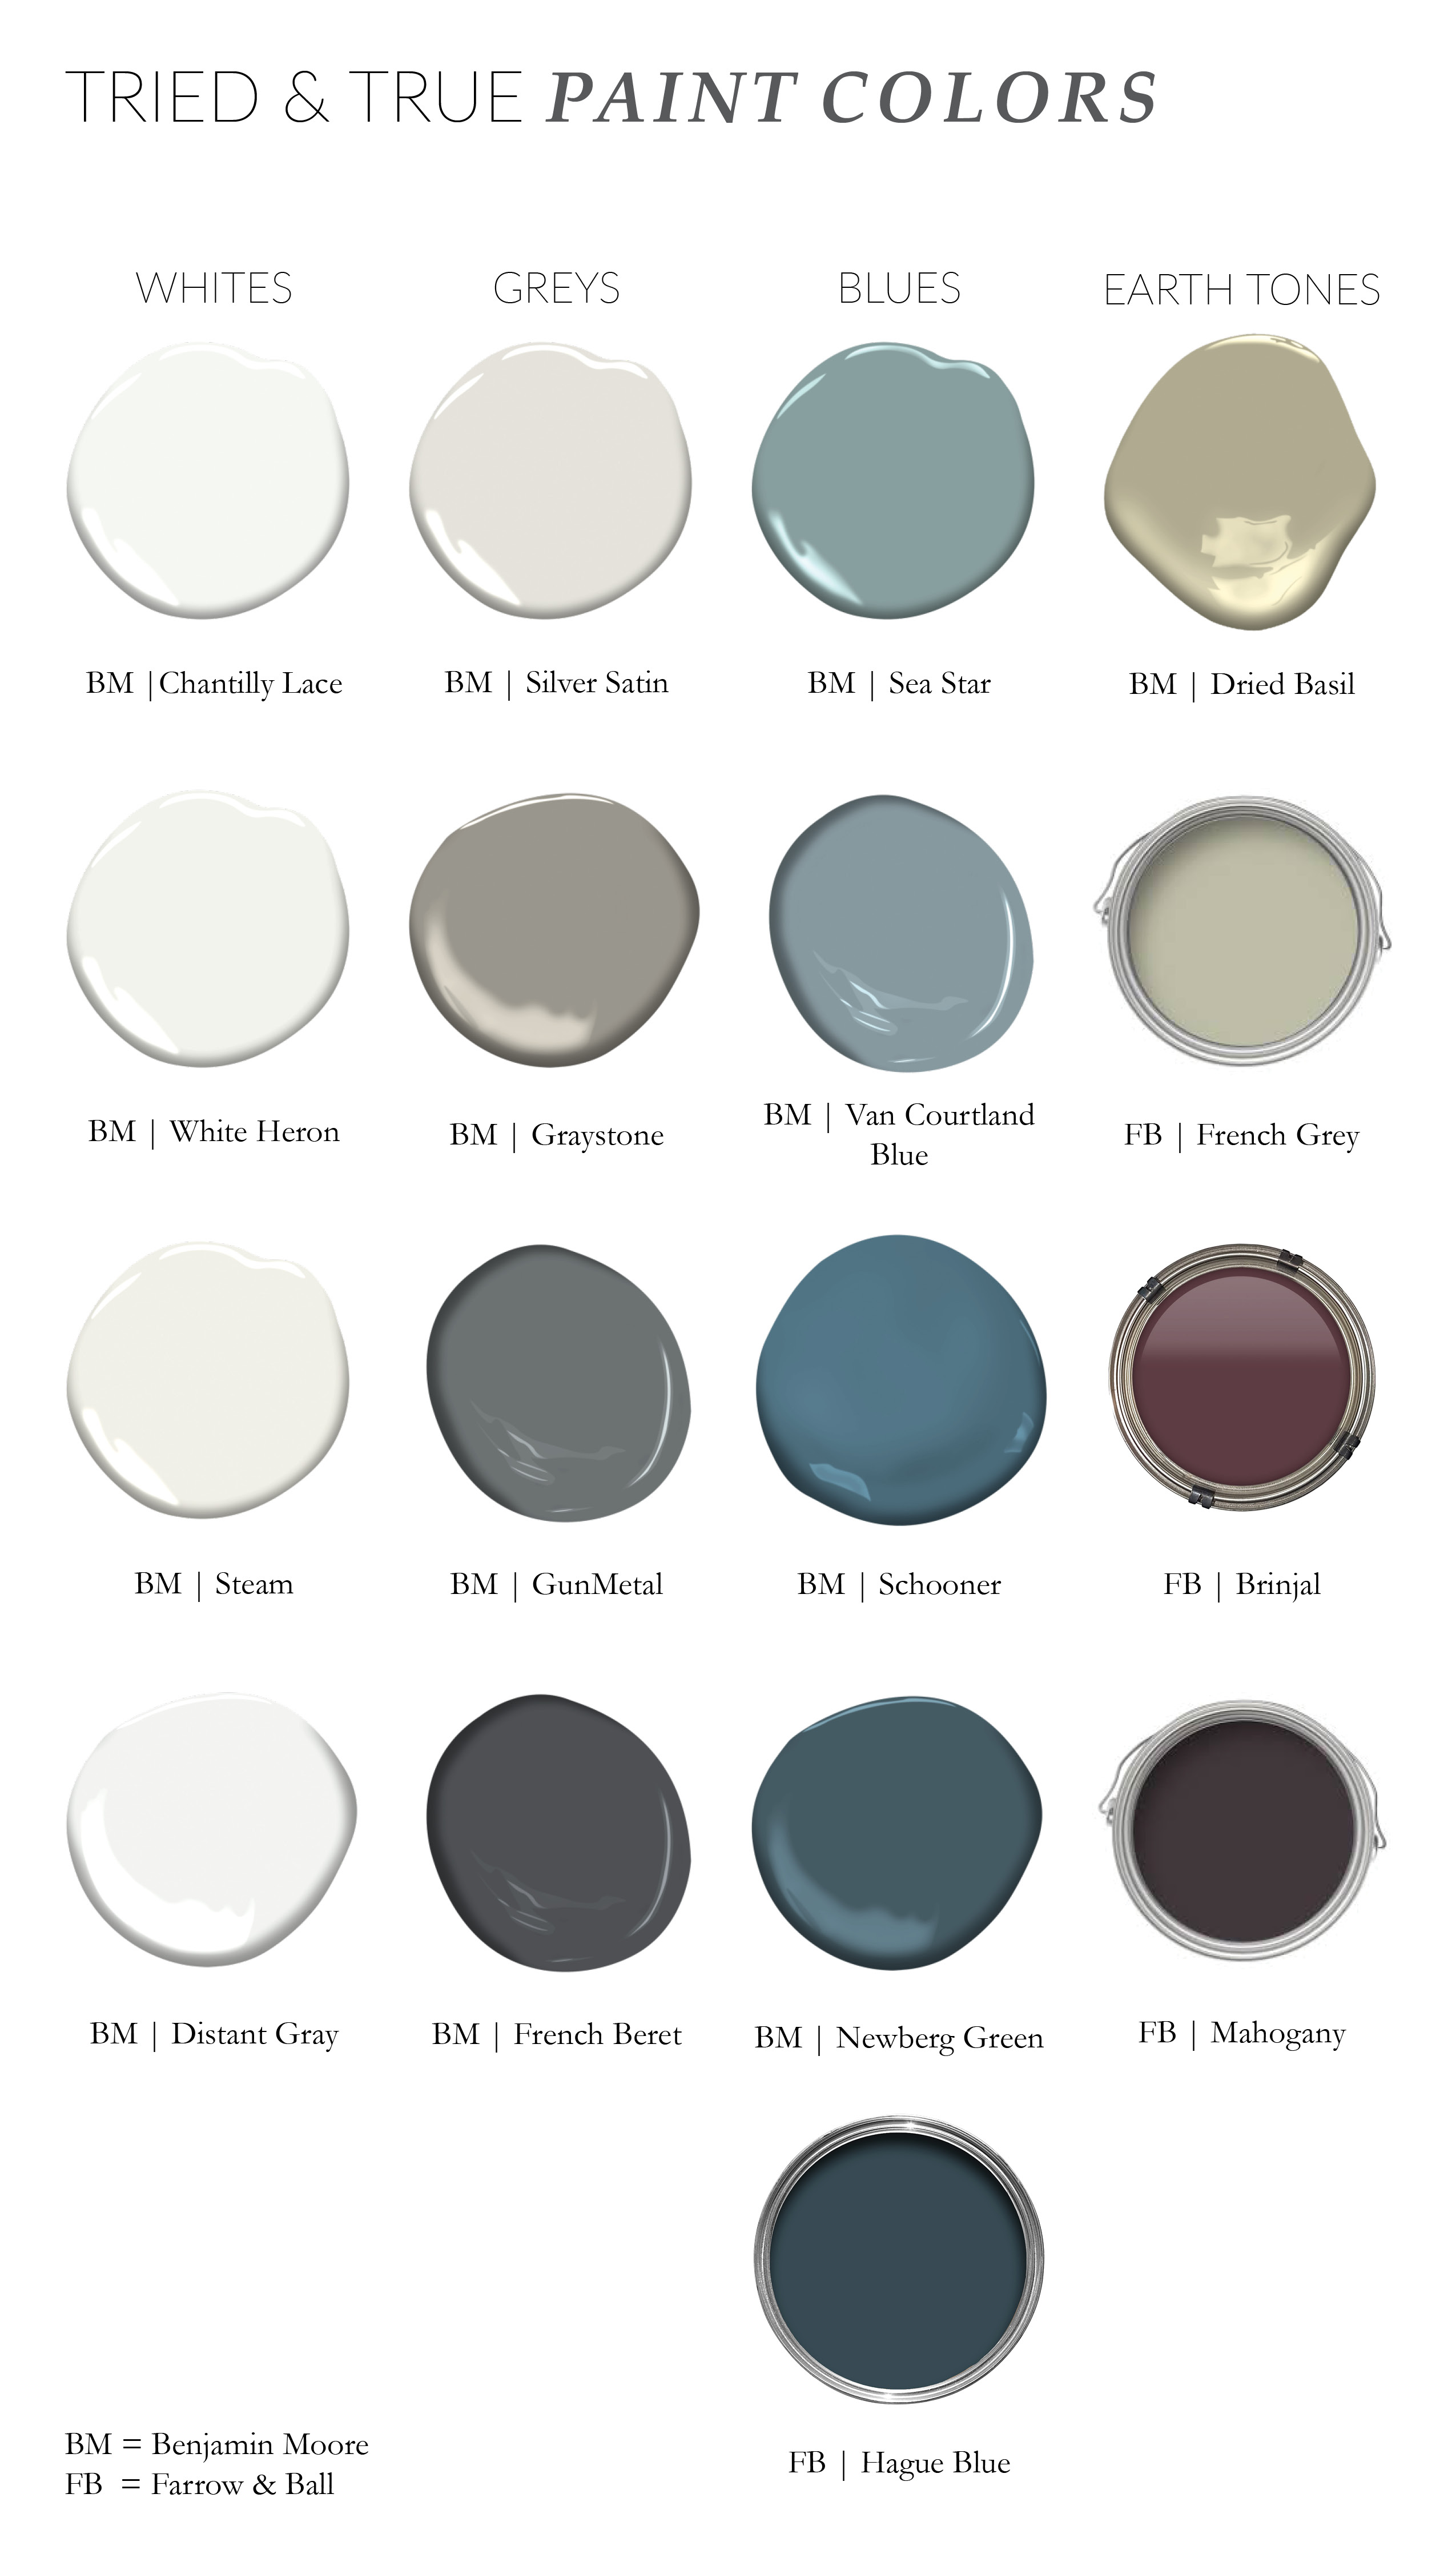 Silver Satin, a Soft Gray Paint Color by Benjamin Moore - Love